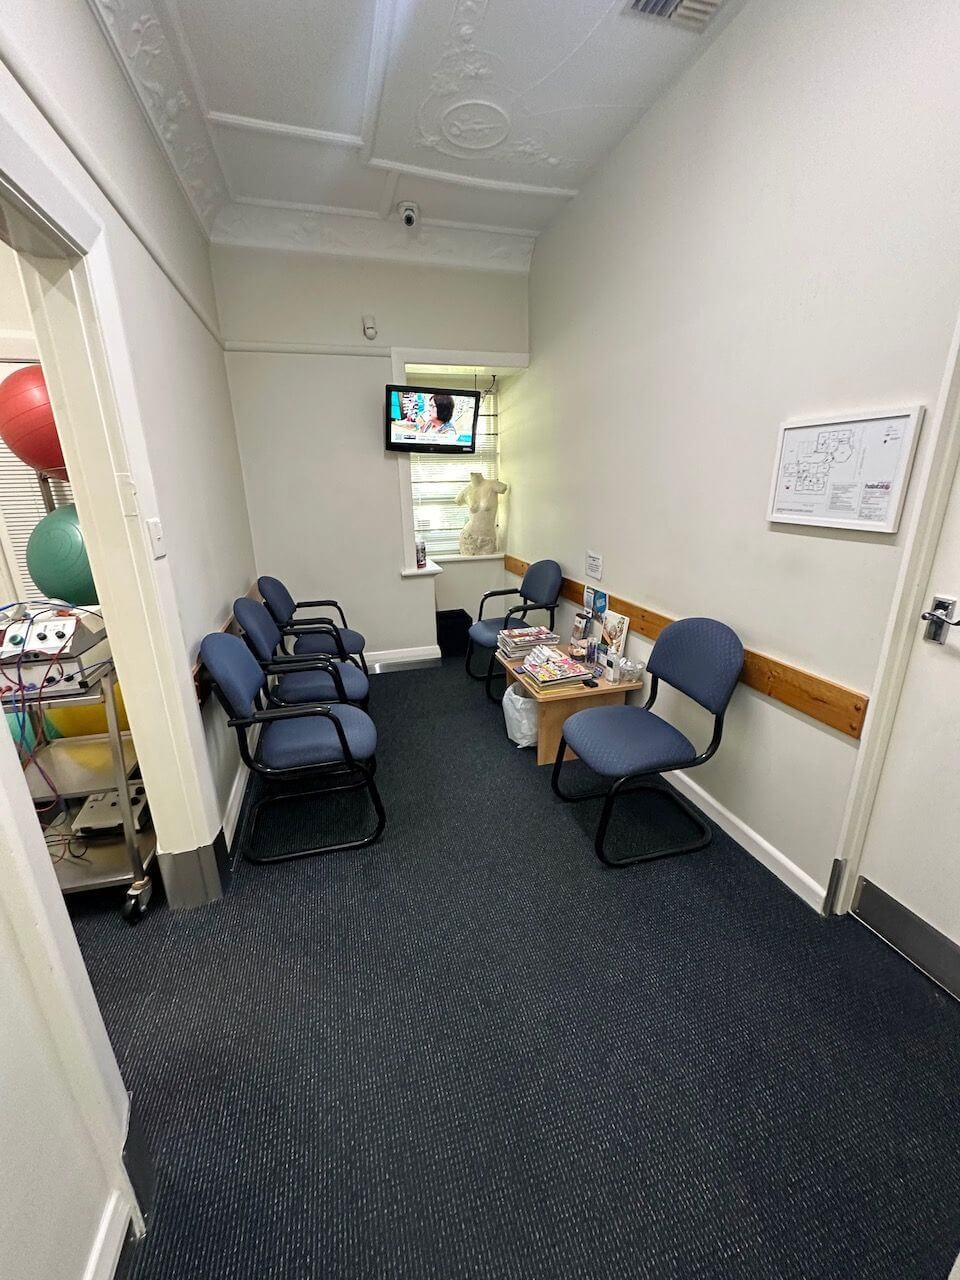 Established In 1975 Medical, Sports Clinic, Allied Health Professionals Se Melb